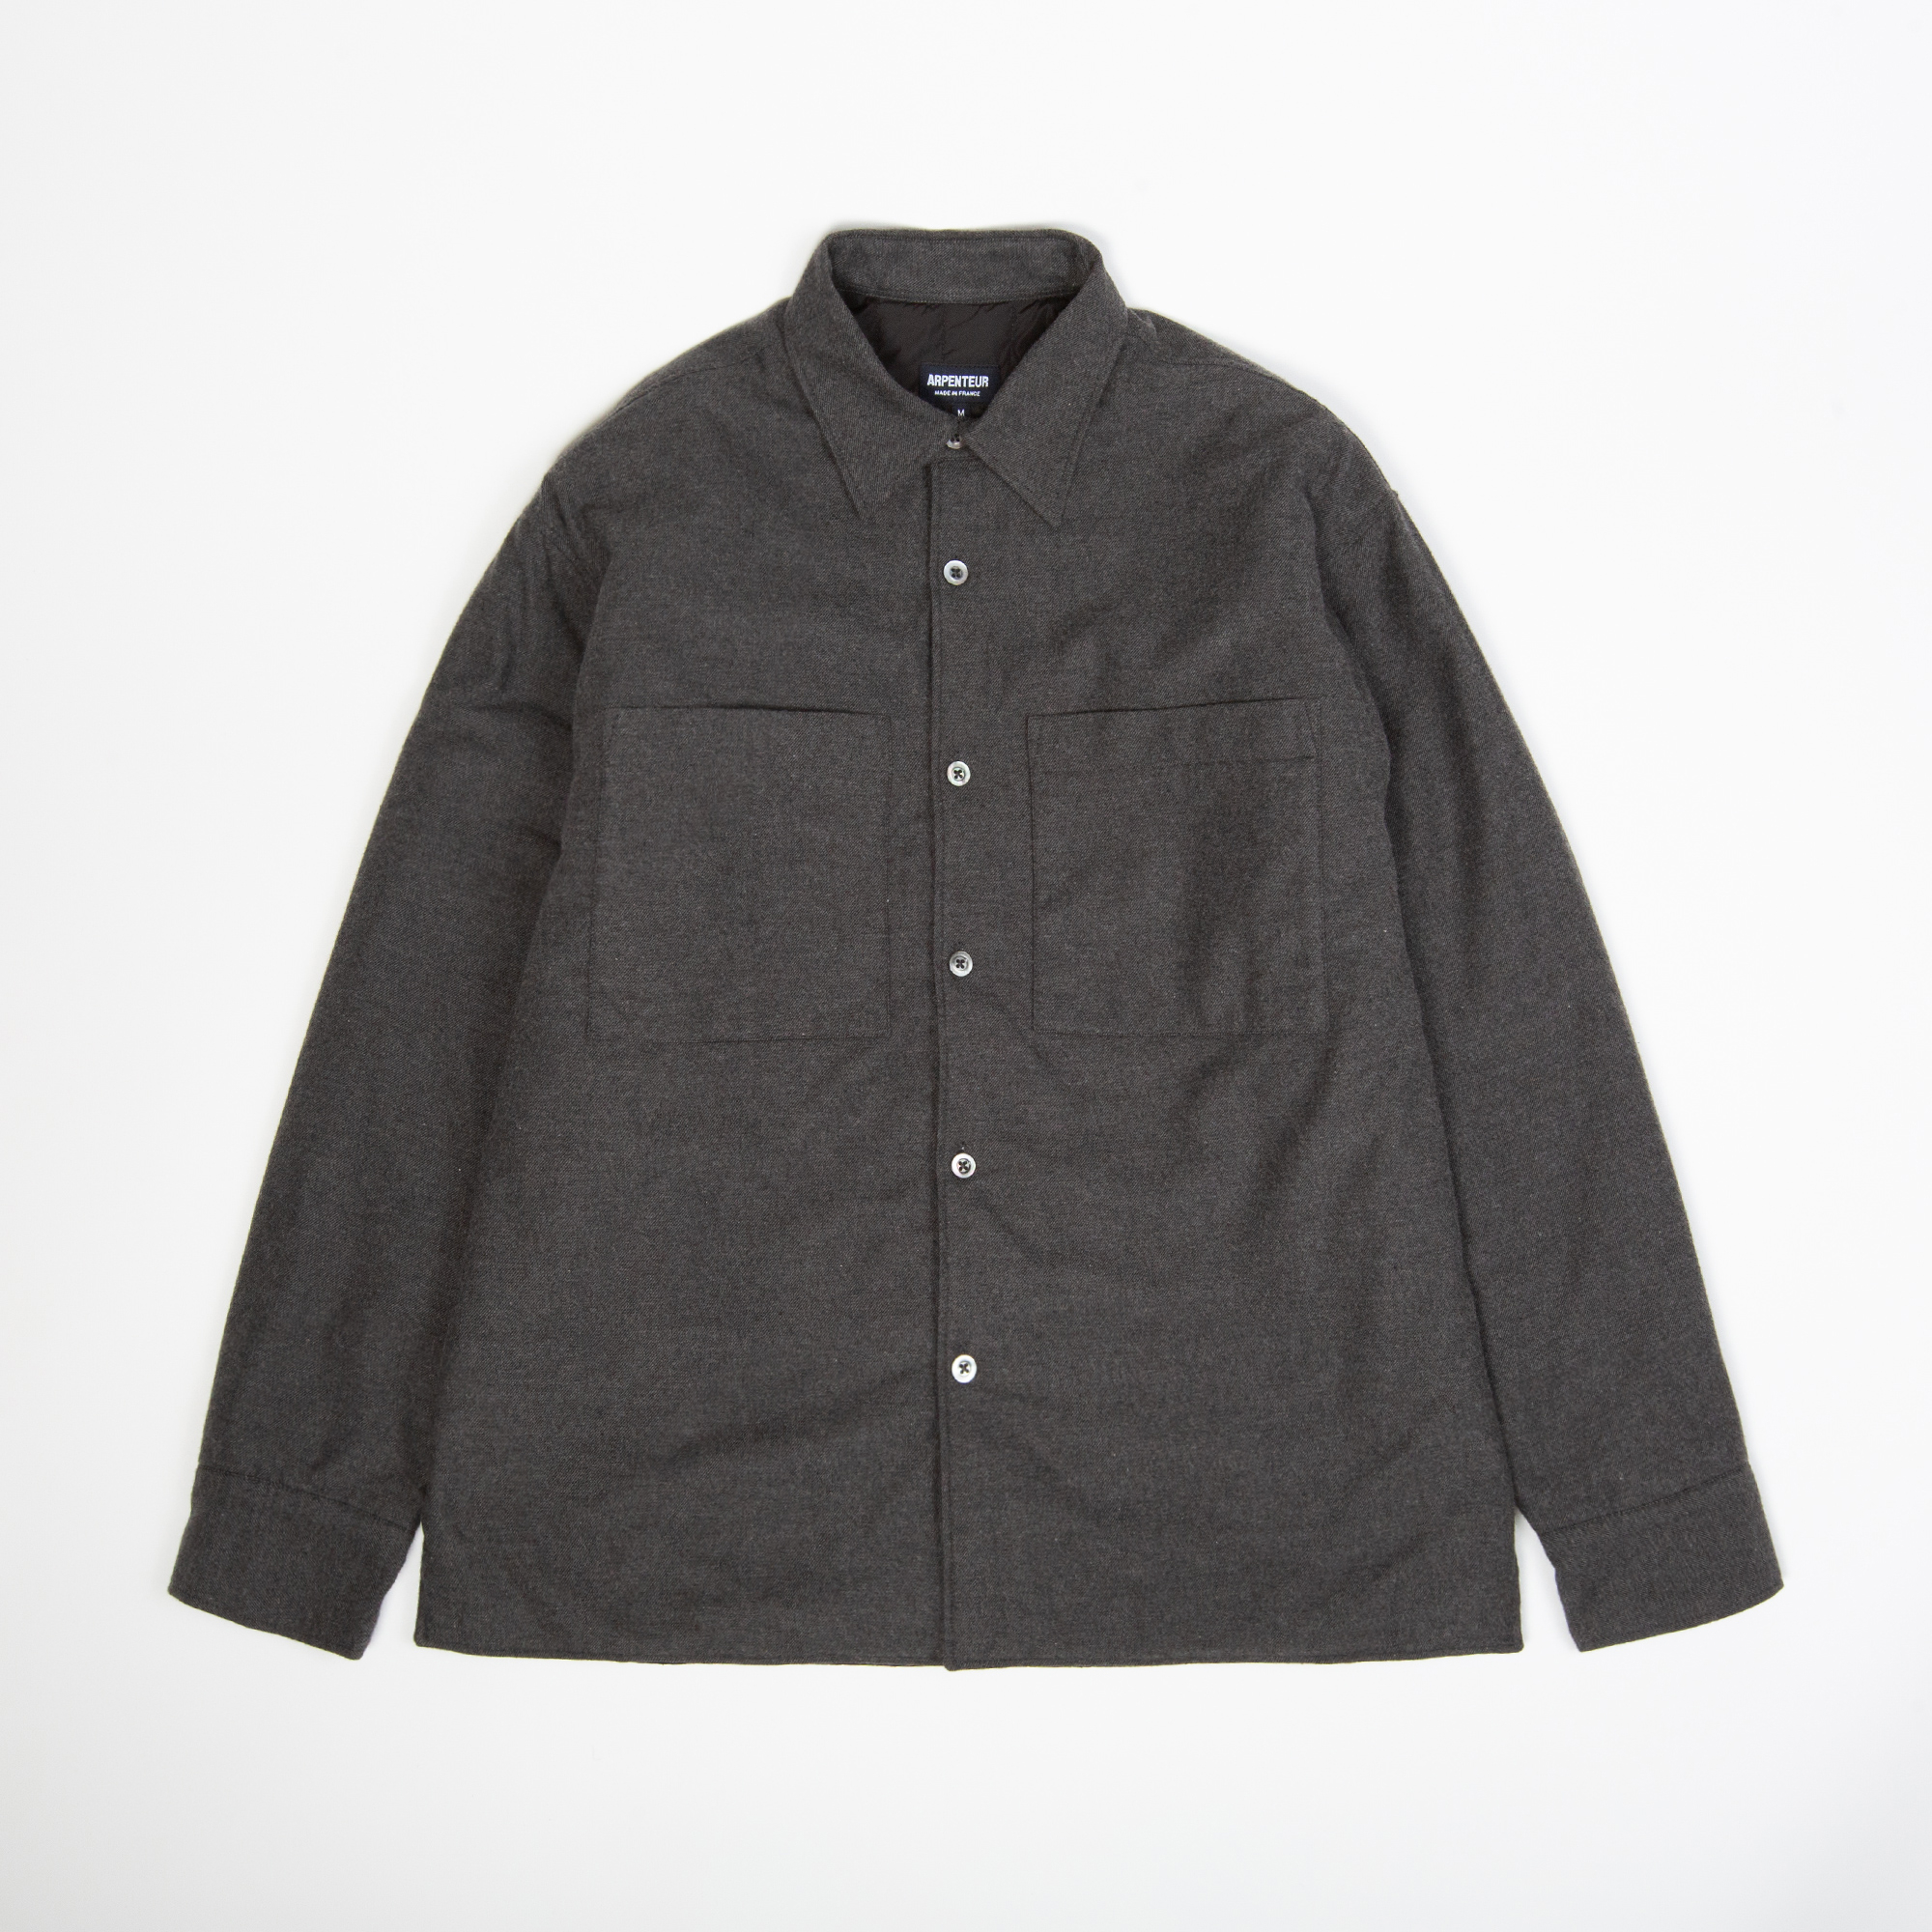 TWIN shirt in Charcoal color by Arpenteur